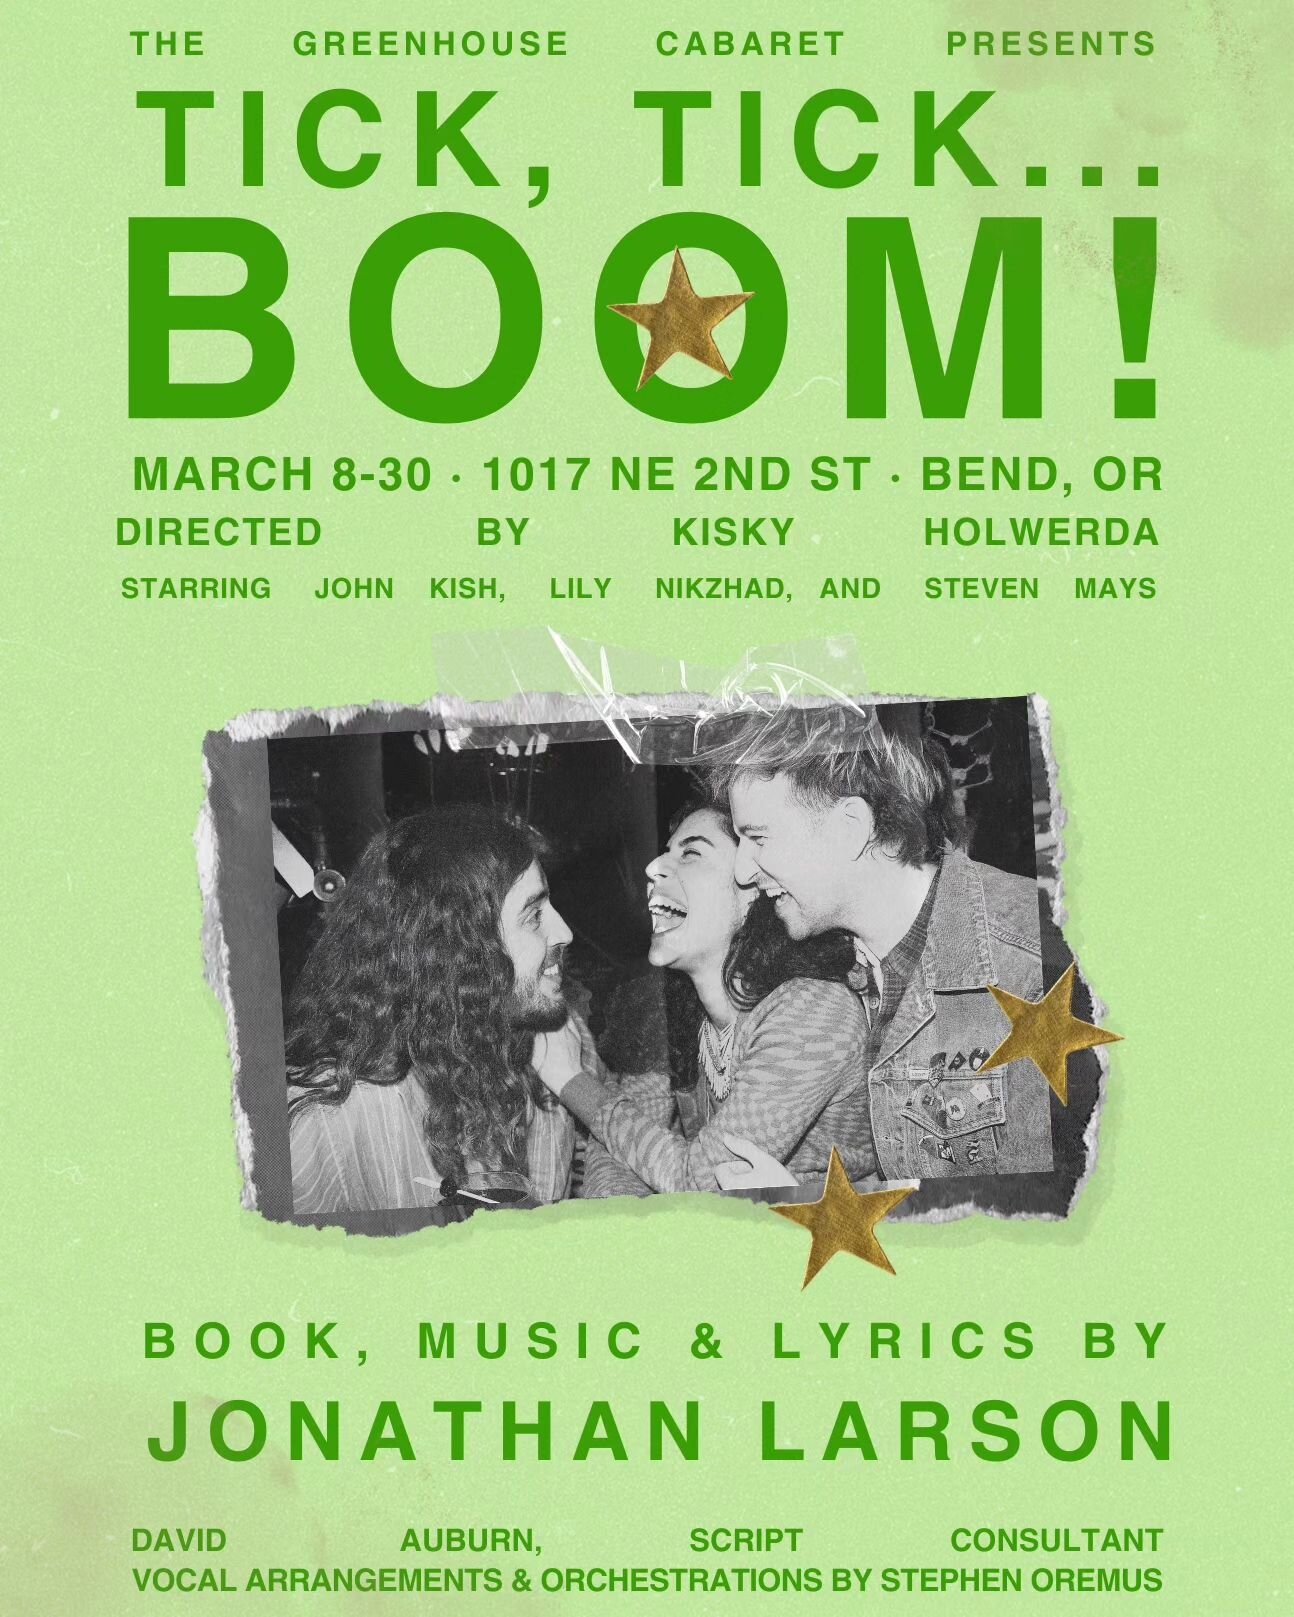 &ldquo;Can he make his mark if he gives up his spark?&rdquo;

Before there was RENT&hellip; there was tick, tick&hellip; BOOM!, Jonathan Larson&rsquo;s explosive musical about life, death, and the necessity of art. The semi-autobiographical story fol